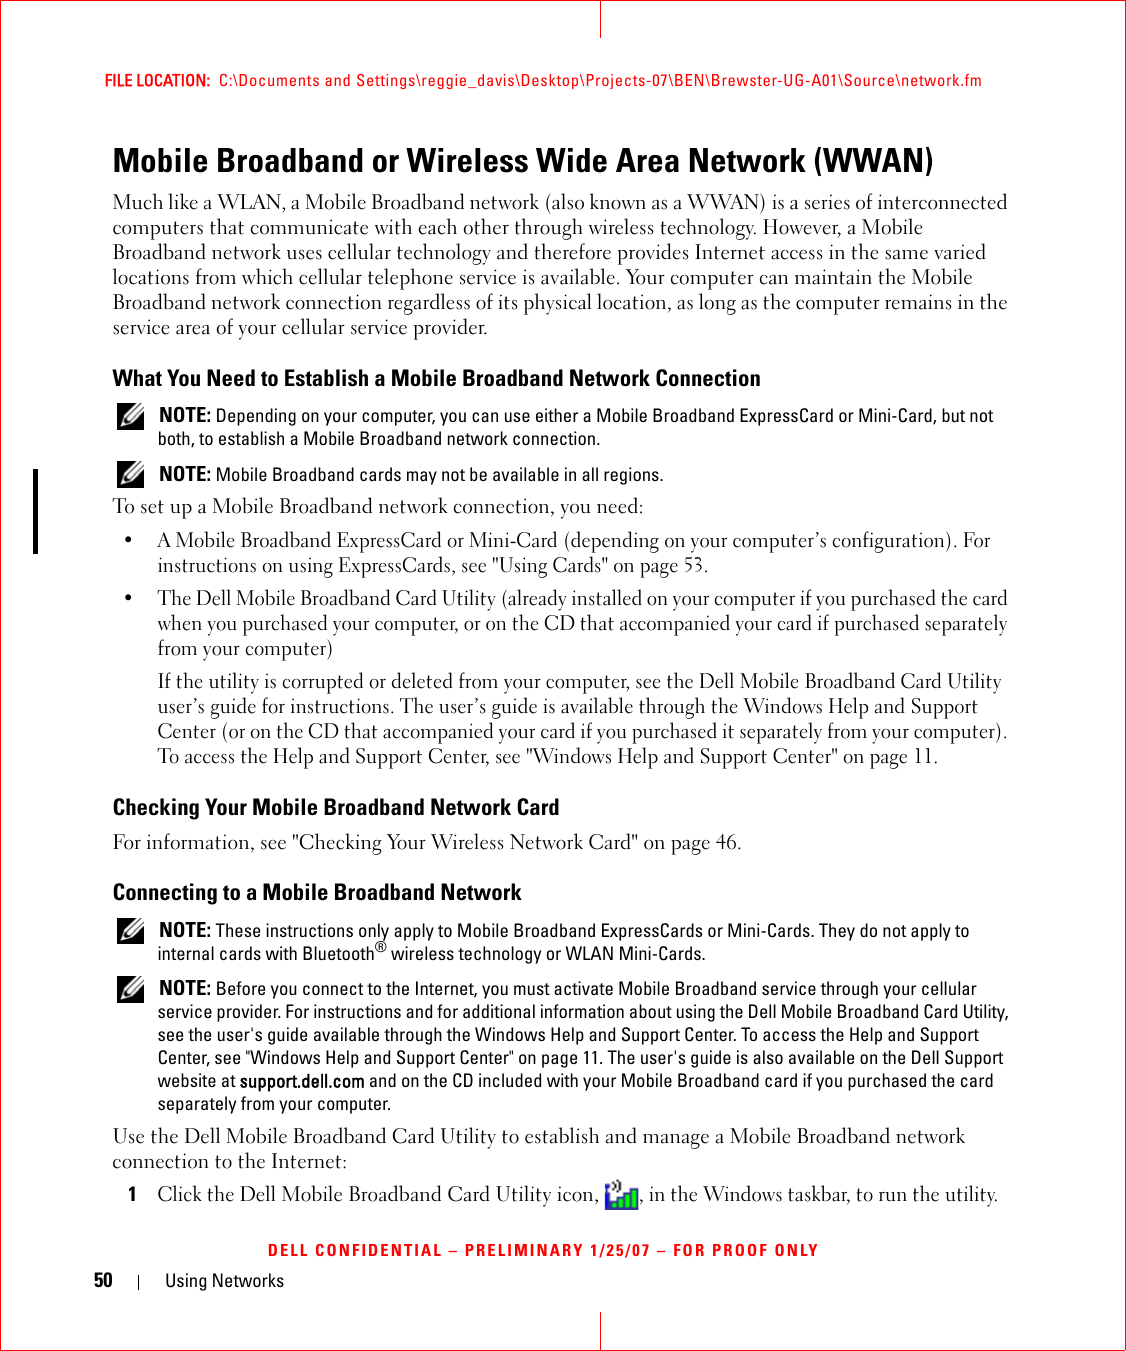 50 Using NetworksFILE LOCATION:  C:\Documents and Settings\reggie_davis\Desktop\Projects-07\BEN\Brewster-UG-A01\Source\network.fmDELL CONFIDENTIAL – PRELIMINARY 1/25/07 – FOR PROOF ONLYMobile Broadband or Wireless Wide Area Network (WWAN)Much like a WLAN, a Mobile Broadband network (also known as a WWAN) is a series of interconnected computers that communicate with each other through wireless technology. However, a Mobile Broadband network uses cellular technology and therefore provides Internet access in the same varied locations from which cellular telephone service is available. Your computer can maintain the Mobile Broadband network connection regardless of its physical location, as long as the computer remains in the service area of your cellular service provider.What You Need to Establish a Mobile Broadband Network Connection NOTE: Depending on your computer, you can use either a Mobile Broadband ExpressCard or Mini-Card, but not both, to establish a Mobile Broadband network connection. NOTE: Mobile Broadband cards may not be available in all regions.To set up a Mobile Broadband network connection, you need:• A Mobile Broadband ExpressCard or Mini-Card (depending on your computer’s configuration). For instructions on using ExpressCards, see &quot;Using Cards&quot; on page 53. • The Dell Mobile Broadband Card Utility (already installed on your computer if you purchased the card when you purchased your computer, or on the CD that accompanied your card if purchased separately from your computer)If the utility is corrupted or deleted from your computer, see the Dell Mobile Broadband Card Utility user’s guide for instructions. The user’s guide is available through the Windows Help and Support Center (or on the CD that accompanied your card if you purchased it separately from your computer). To access the Help and Support Center, see &quot;Windows Help and Support Center&quot; on page 11.Checking Your Mobile Broadband Network CardFor information, see &quot;Checking Your Wireless Network Card&quot; on page 46.Connecting to a Mobile Broadband Network NOTE: These instructions only apply to Mobile Broadband ExpressCards or Mini-Cards. They do not apply to internal cards with Bluetooth® wireless technology or WLAN Mini-Cards. NOTE: Before you connect to the Internet, you must activate Mobile Broadband service through your cellular service provider. For instructions and for additional information about using the Dell Mobile Broadband Card Utility, see the user&apos;s guide available through the Windows Help and Support Center. To access the Help and Support Center, see &quot;Windows Help and Support Center&quot; on page 11. The user&apos;s guide is also available on the Dell Support website at support.dell.com and on the CD included with your Mobile Broadband card if you purchased the card separately from your computer.Use the Dell Mobile Broadband Card Utility to establish and manage a Mobile Broadband network connection to the Internet:1Click the Dell Mobile Broadband Card Utility icon, , in the Windows taskbar, to run the utility.